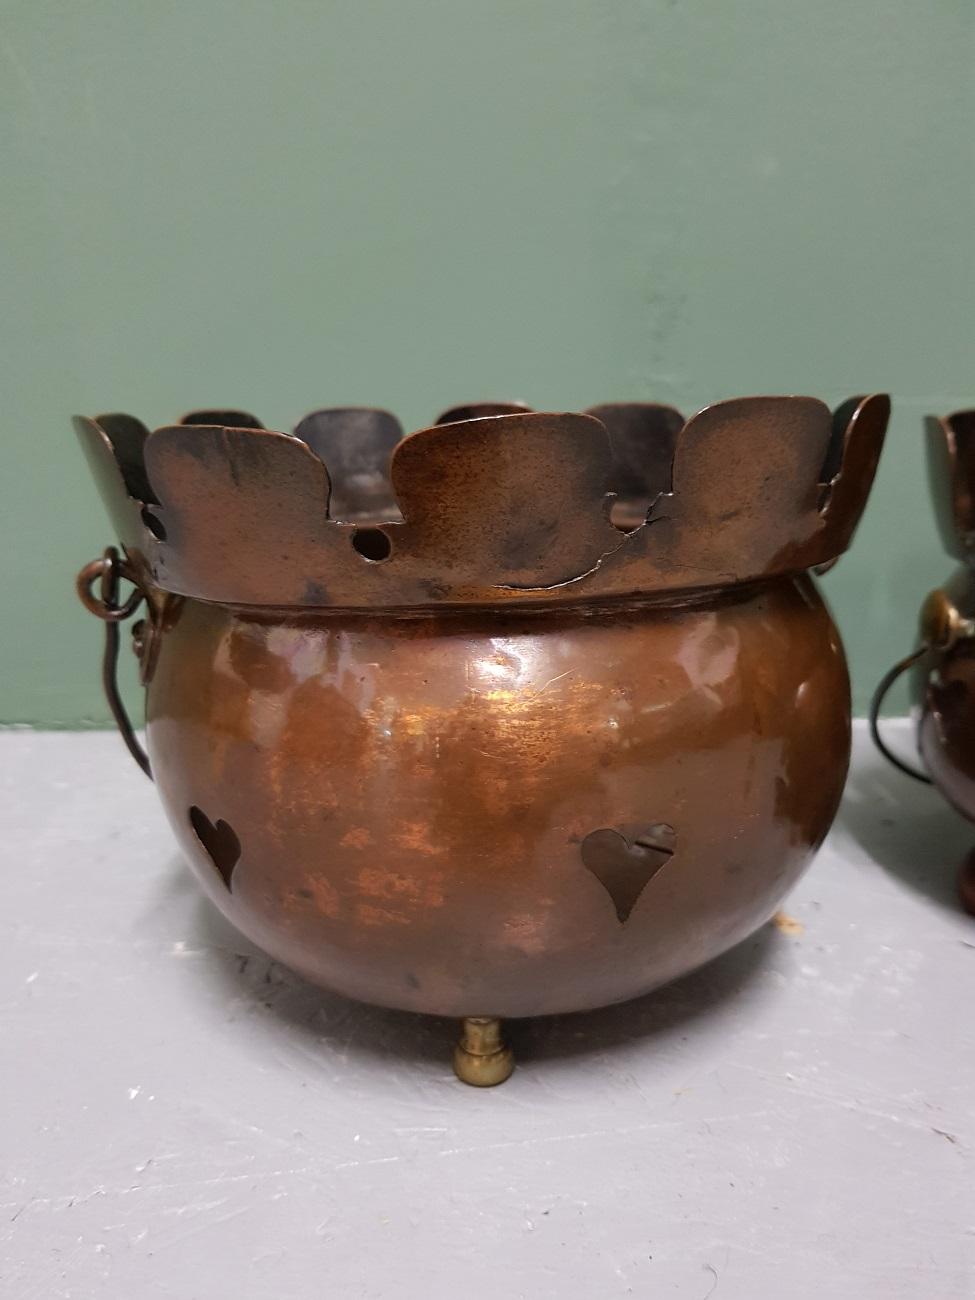 A pair of Art Nouveau copper tea lights decorated with carved hearts and standing on brass and wooden feet, early 20th century. Now they are nice to use as planters.

The measurements are.
Depth 17.5 cm/ 6.8 inch.
Width 17.5 cm/ 6.8